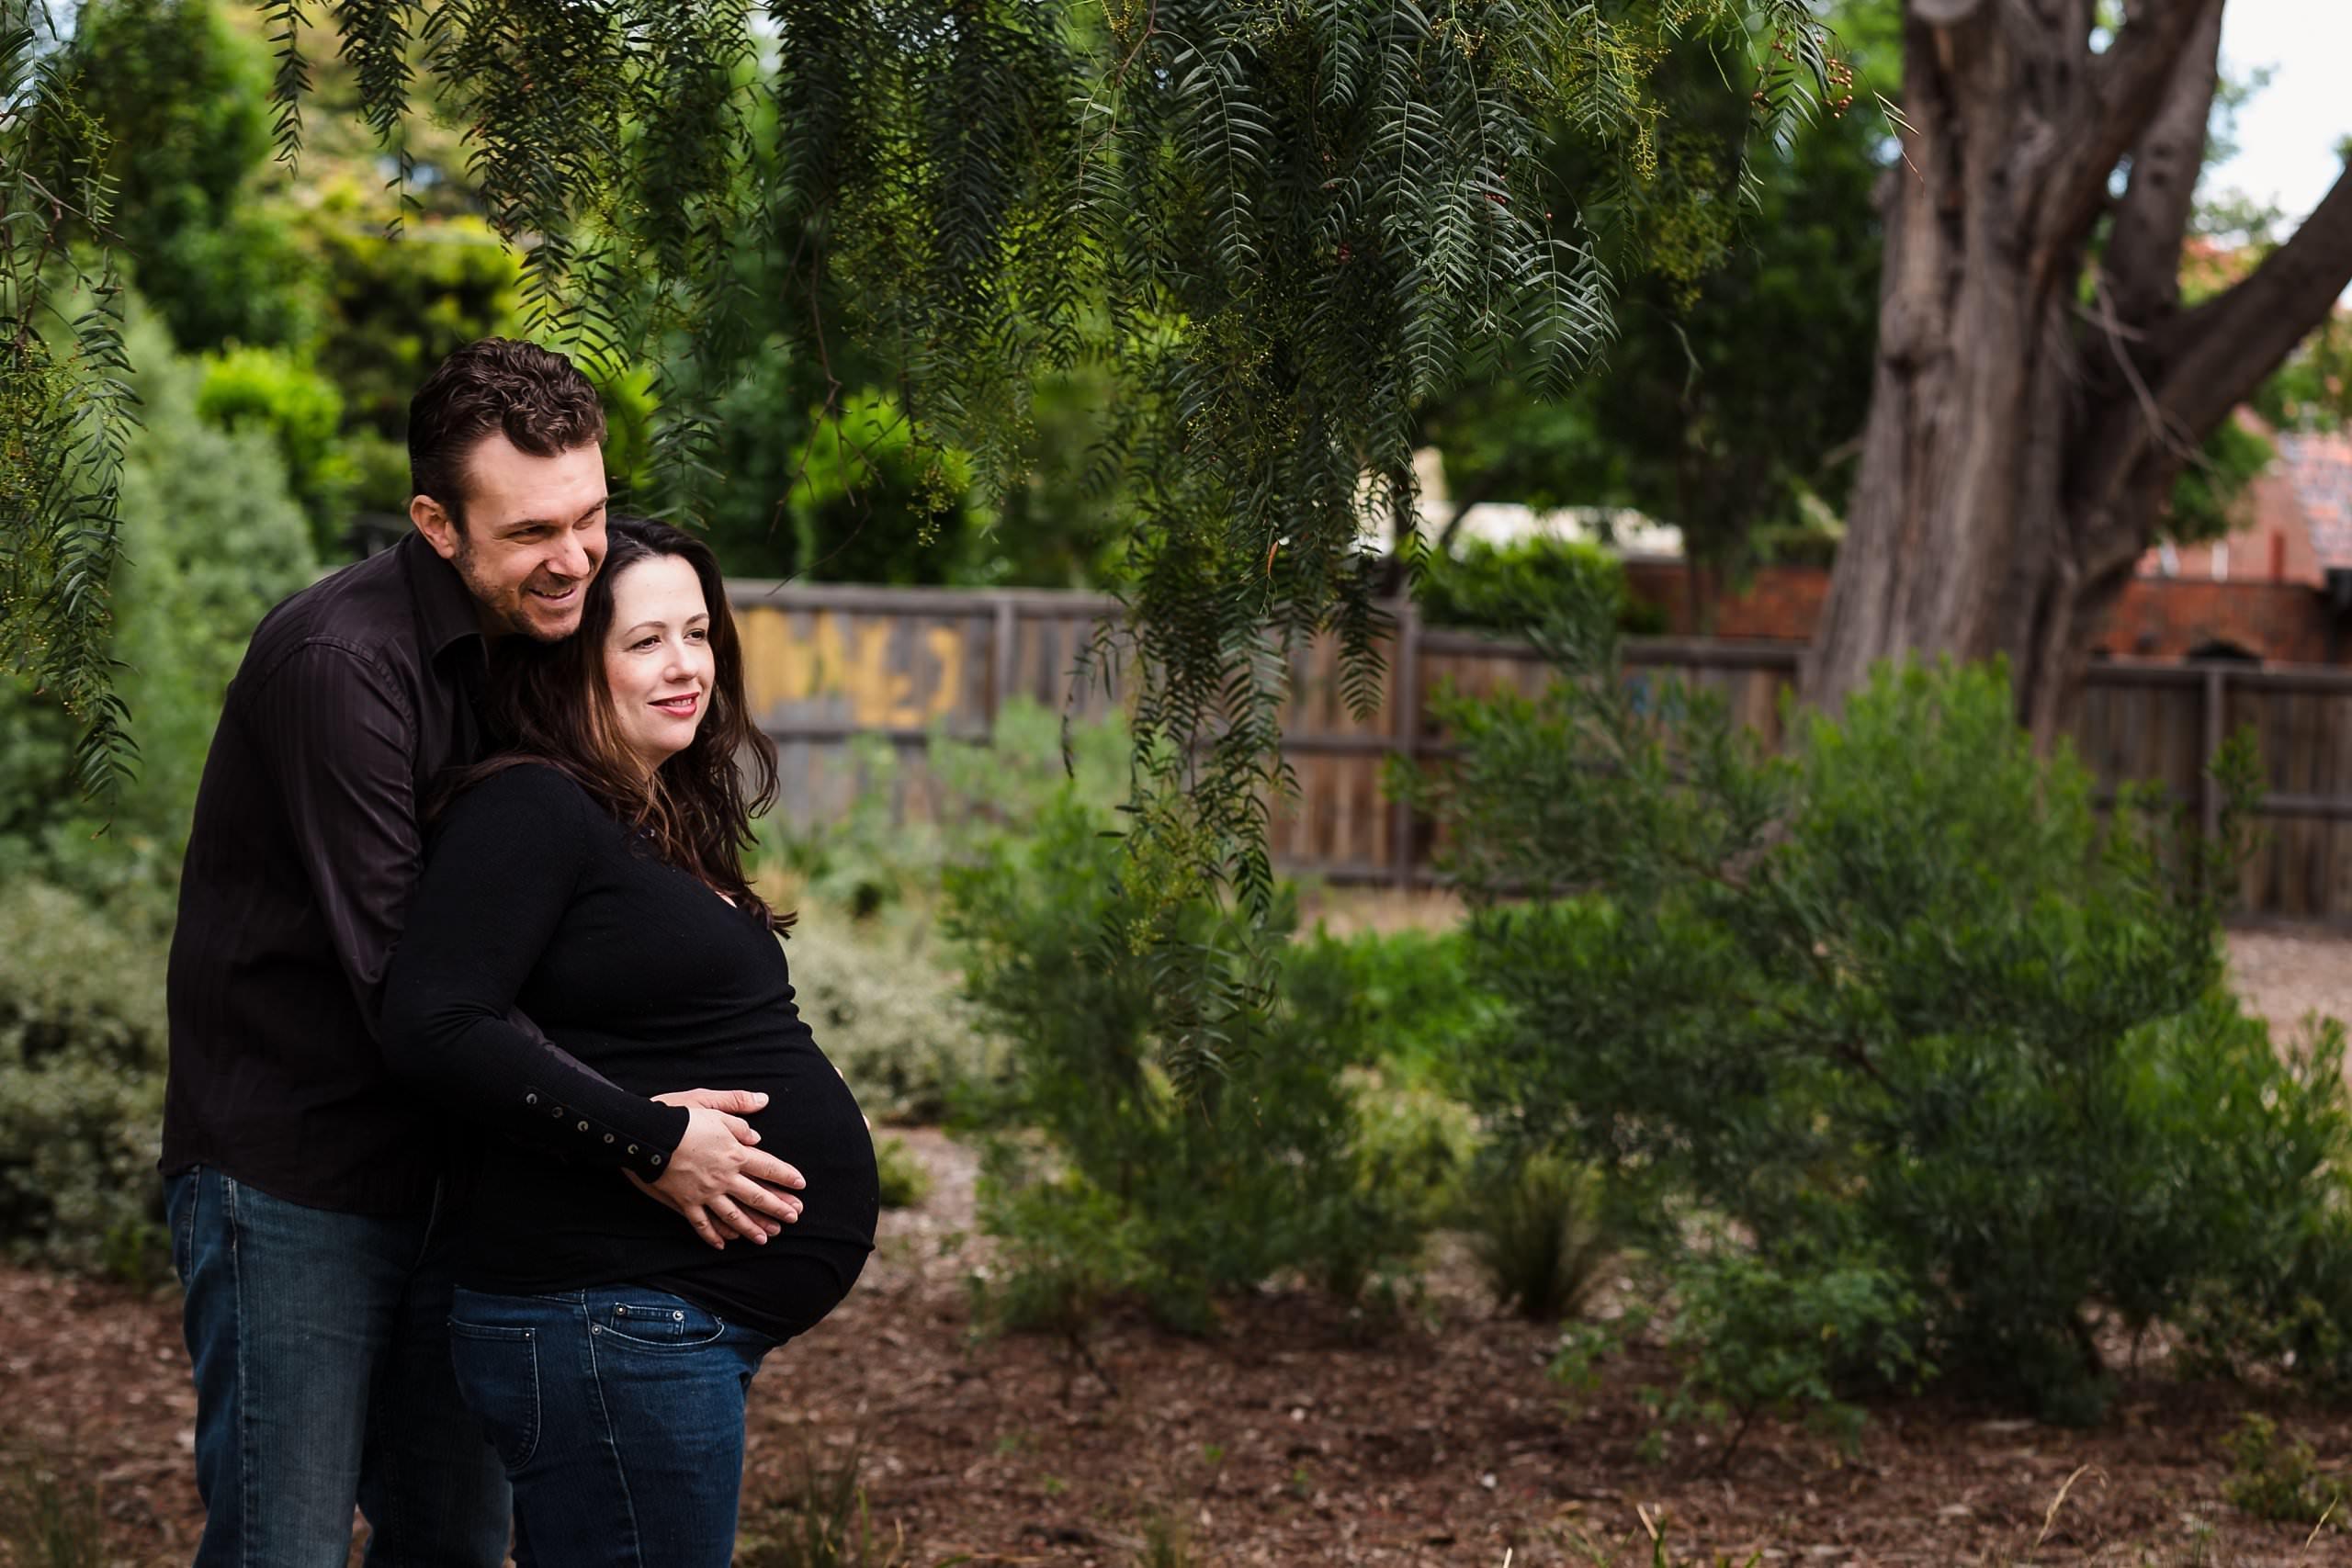 local brighton maternity photographer captures candid moment between expecting couple in park